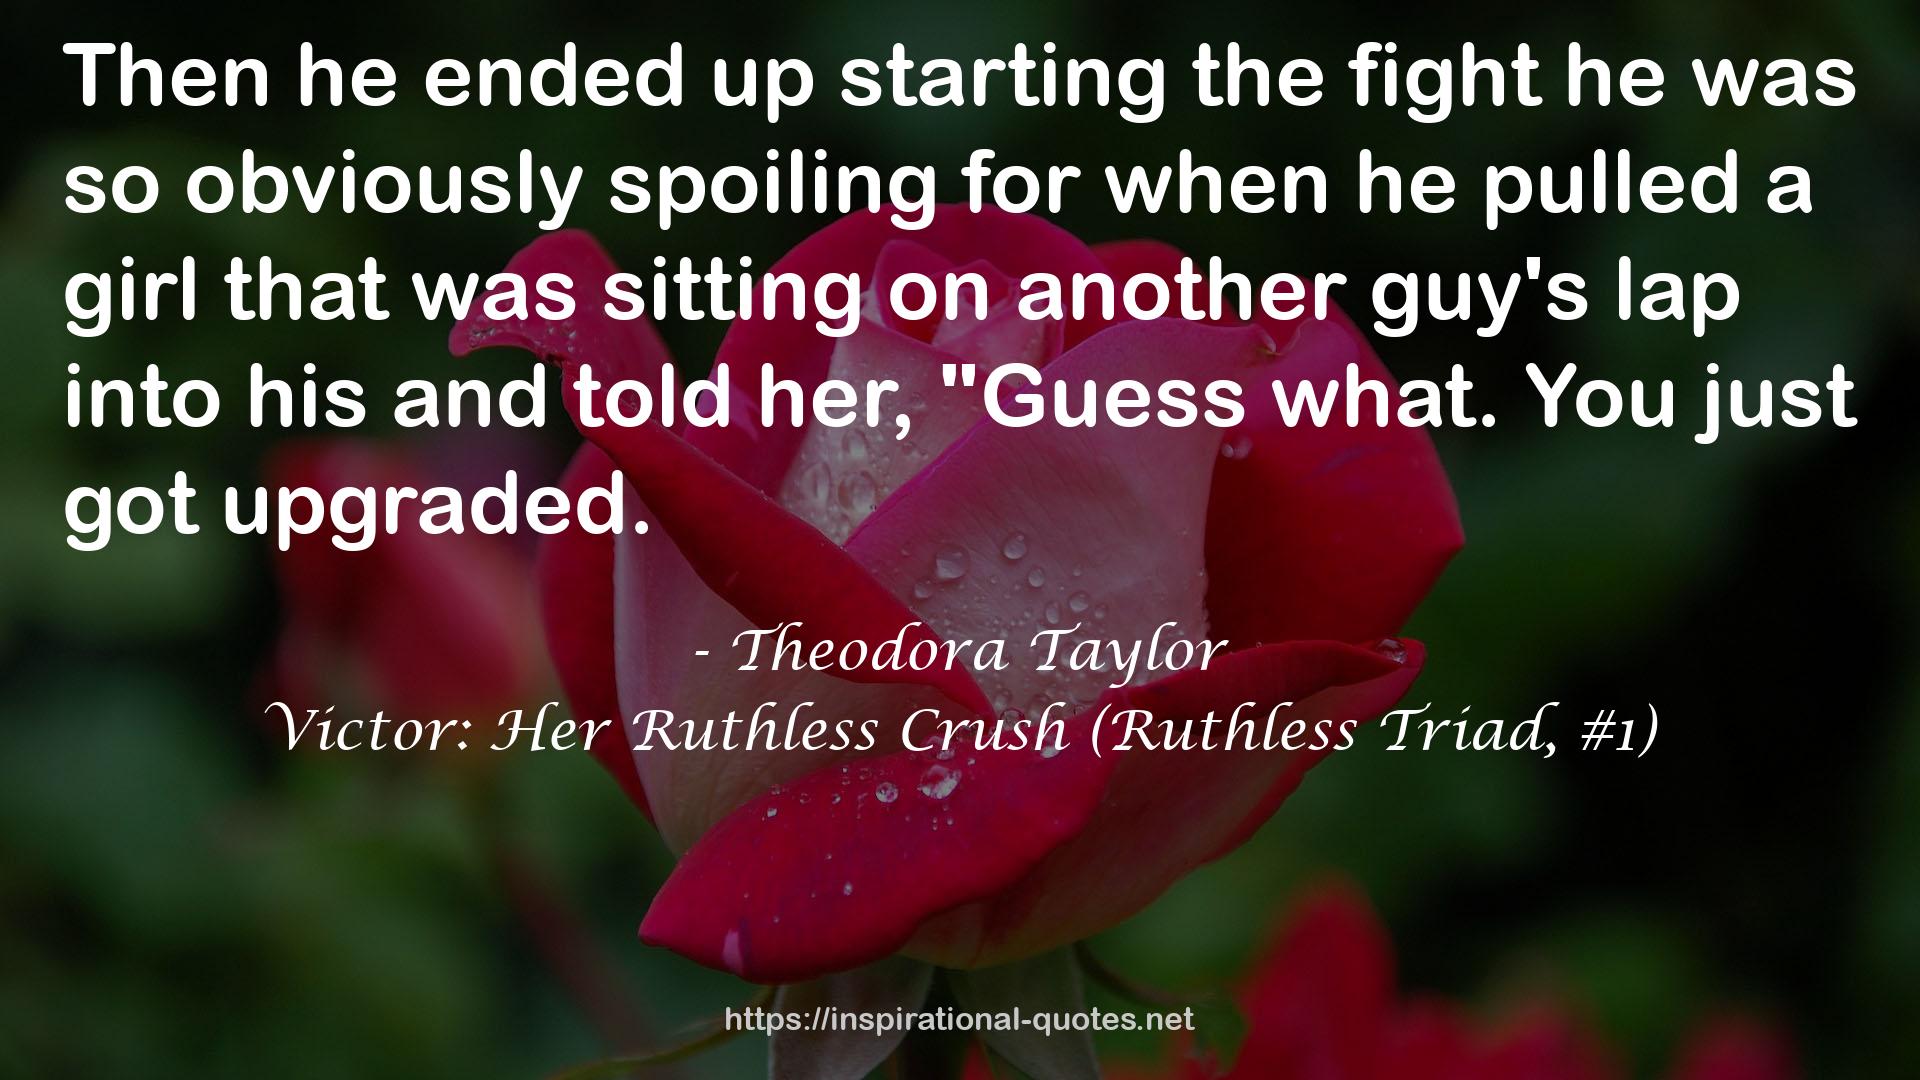 Victor: Her Ruthless Crush (Ruthless Triad, #1) QUOTES